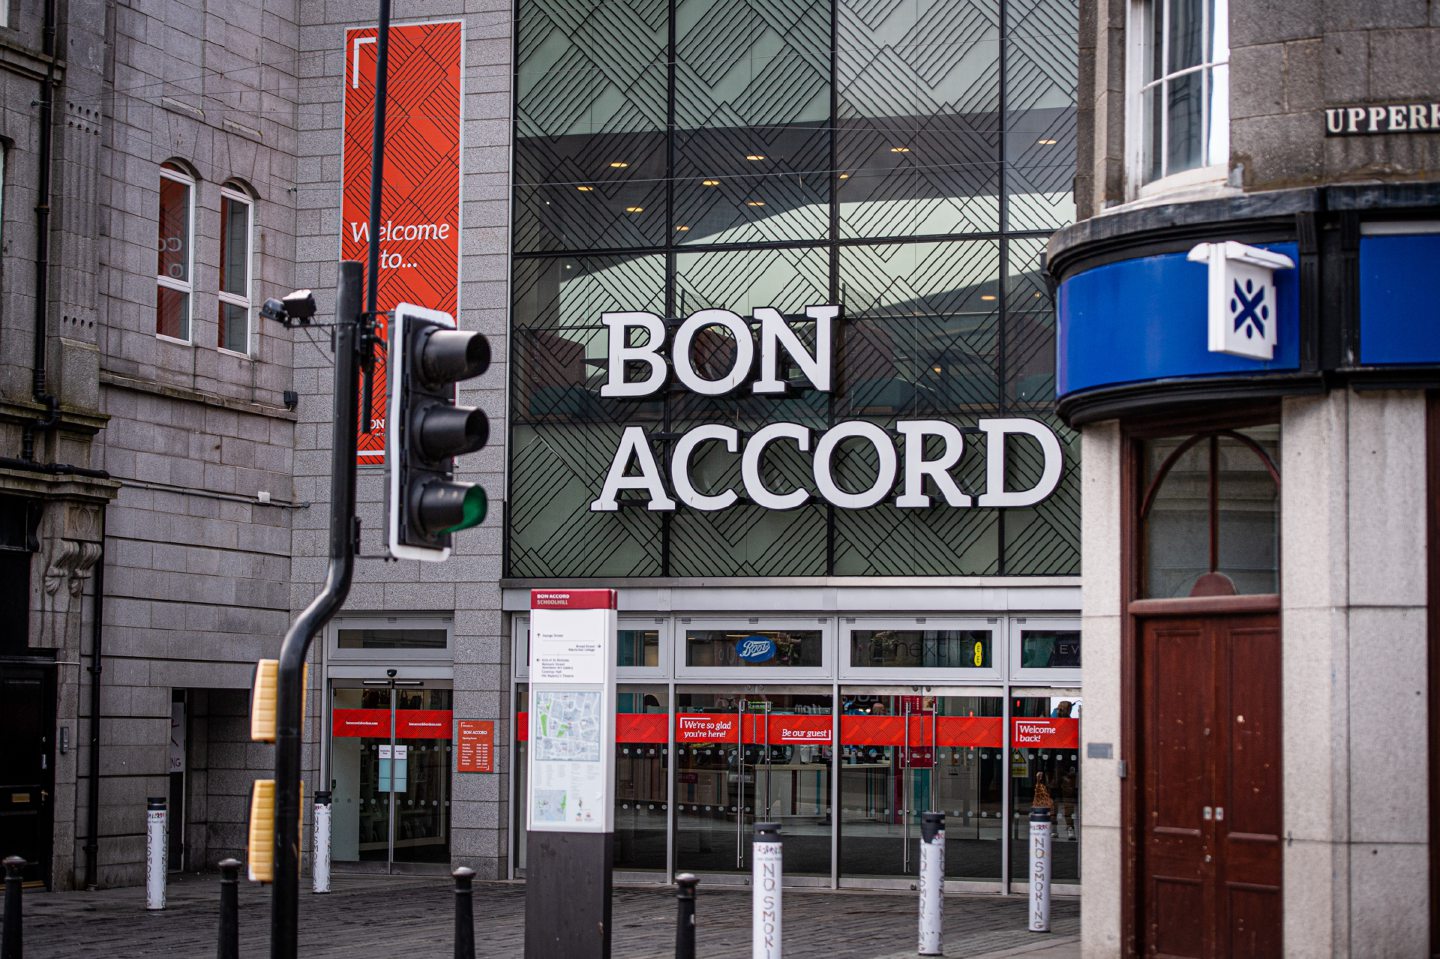 The Bon Accord Shopping Centre in Aberdeen.